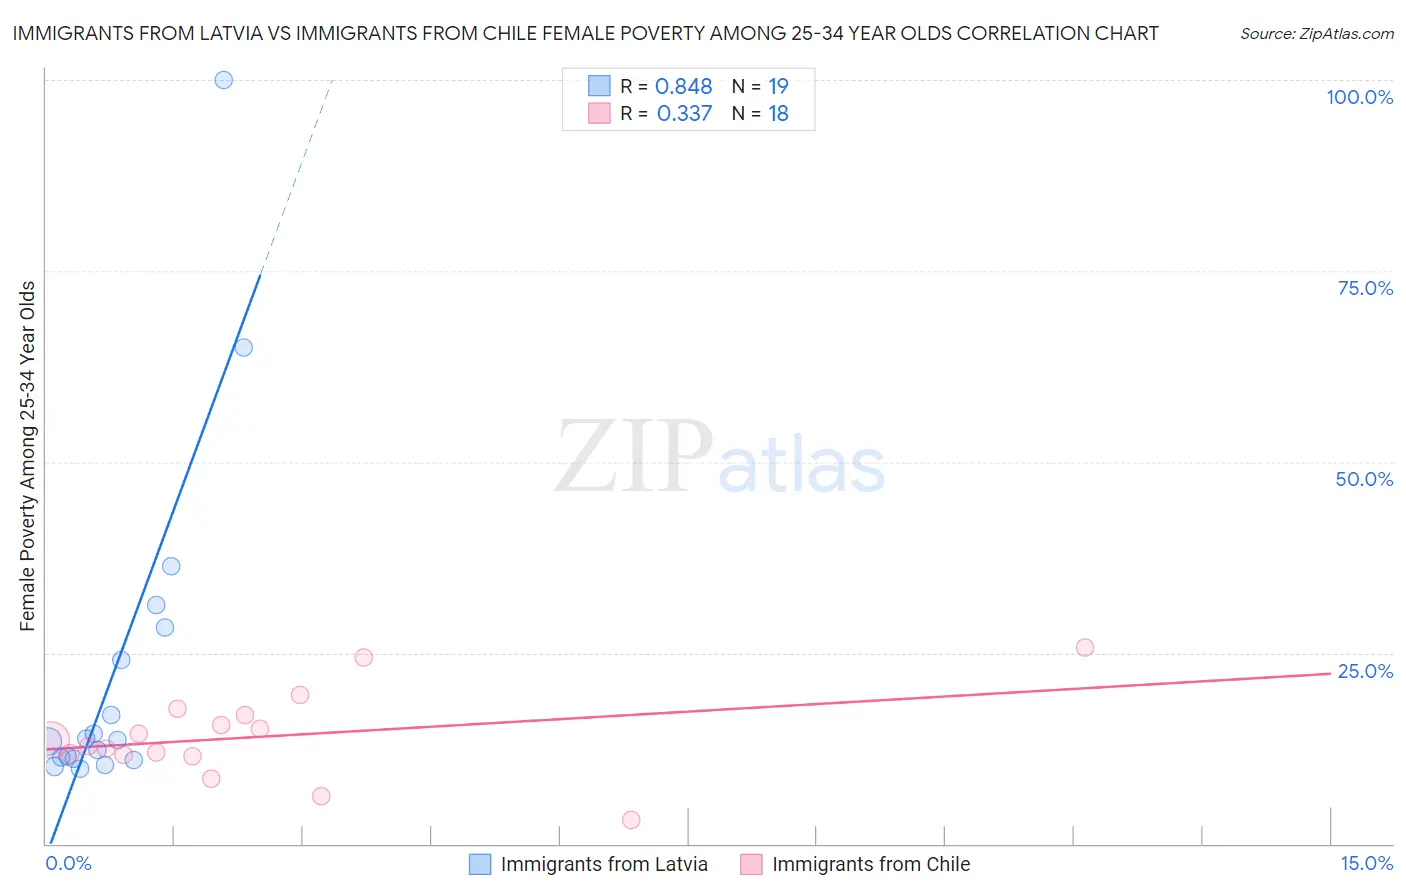 Immigrants from Latvia vs Immigrants from Chile Female Poverty Among 25-34 Year Olds